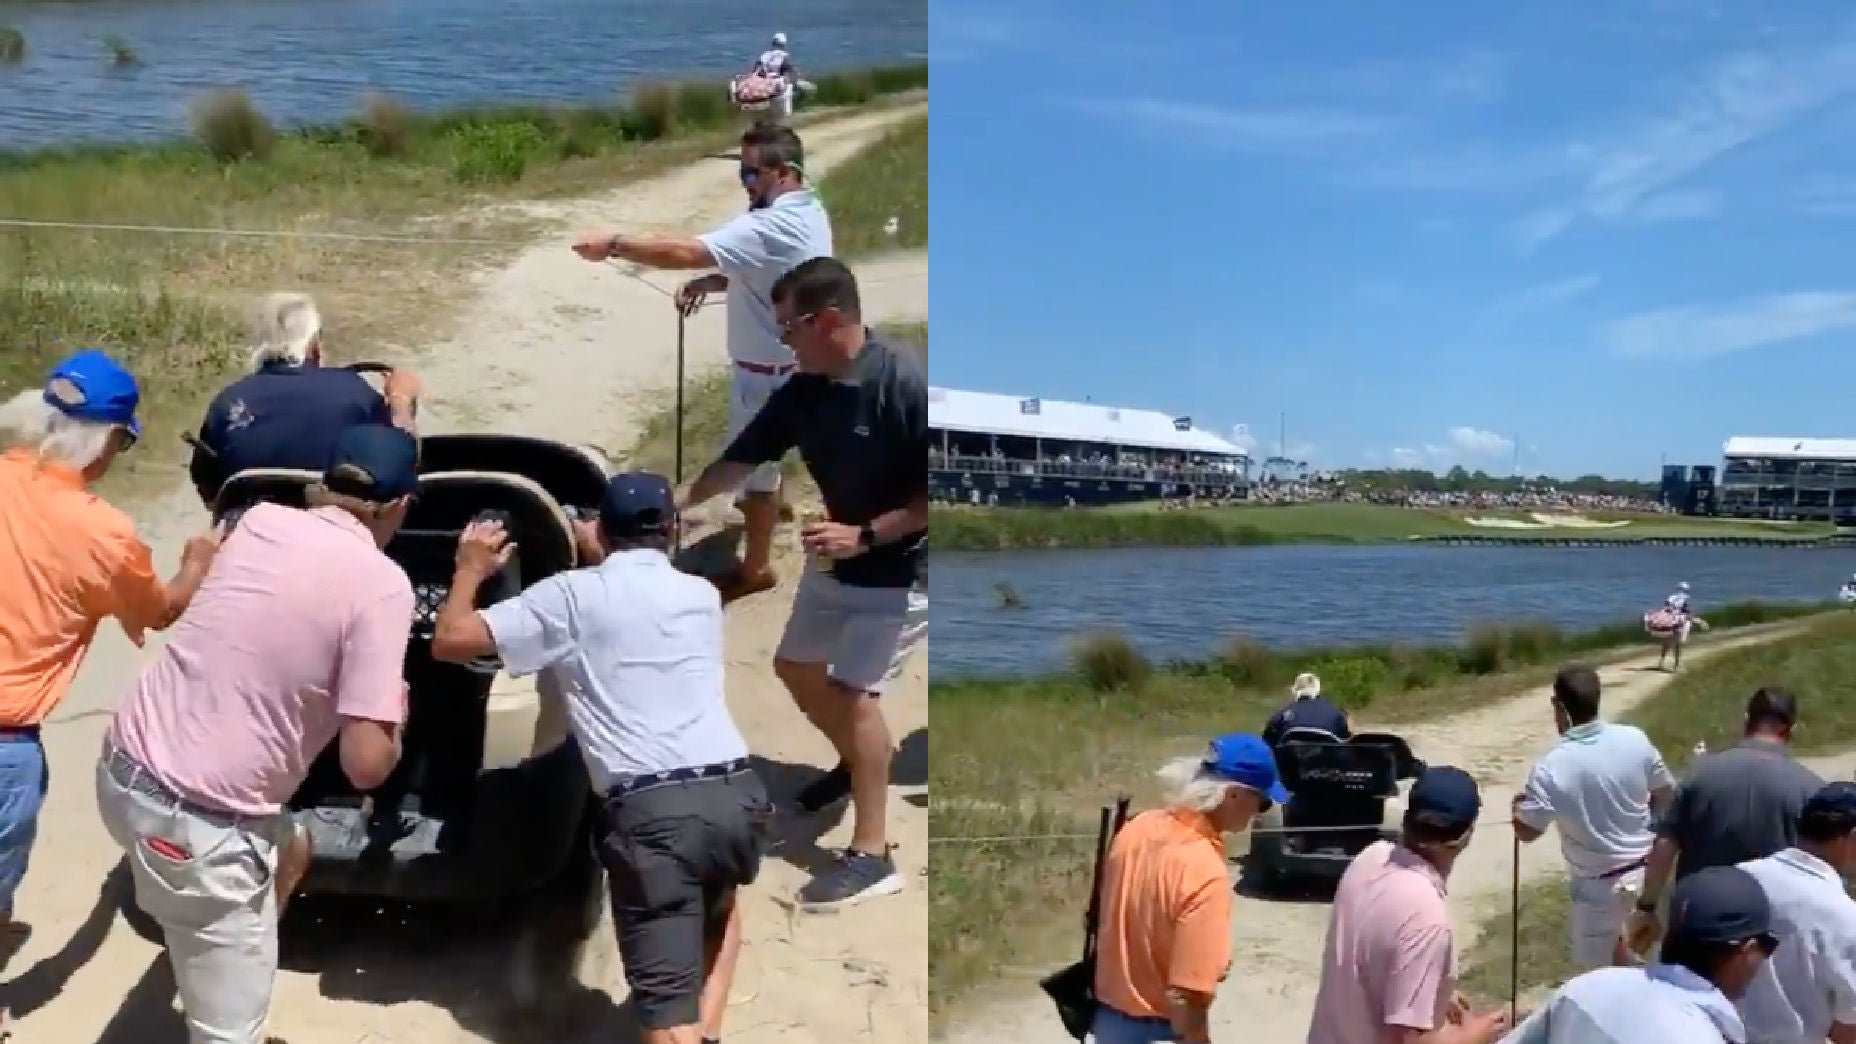 John Daly's cart got stuck at the PGA — and then fans came to the rescue